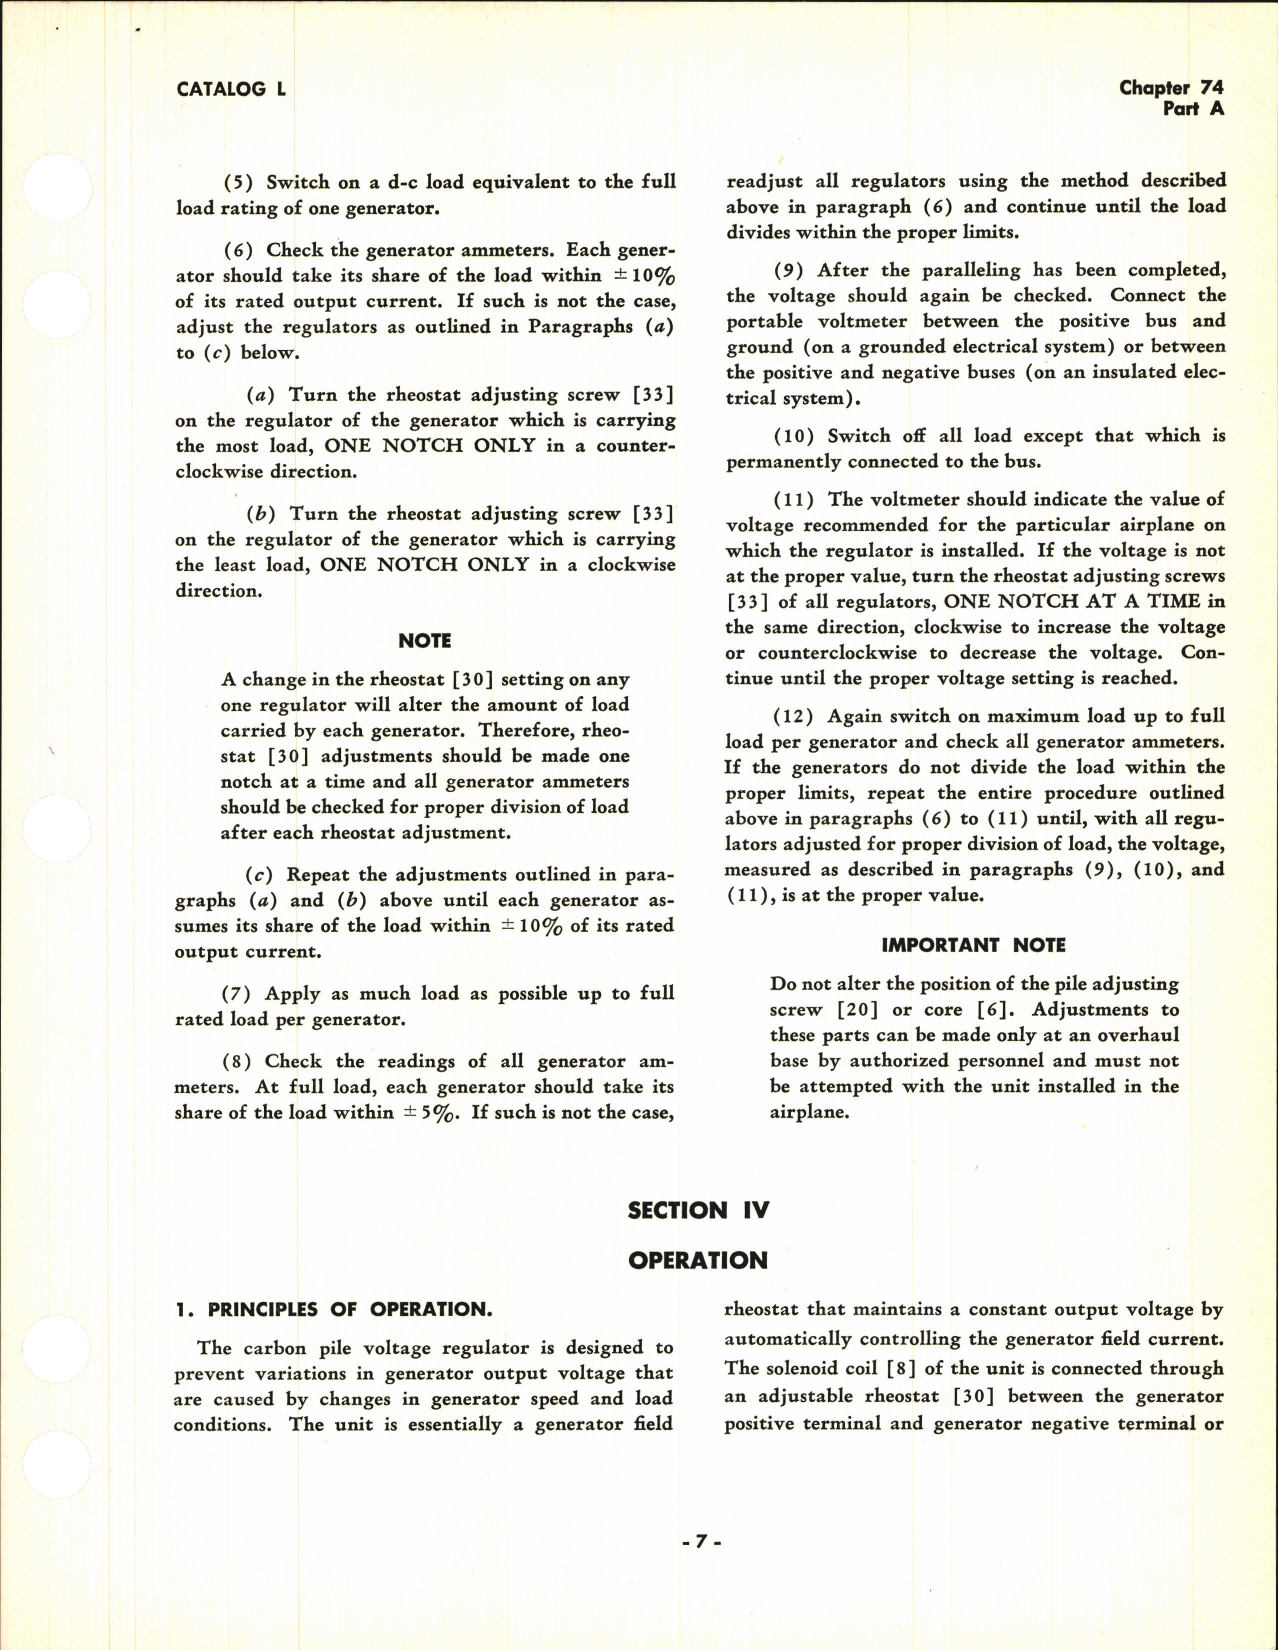 Sample page 7 from AirCorps Library document: Operating and Service Instructions for Carbon Pile Voltage Regulator Types 1042 and 1337